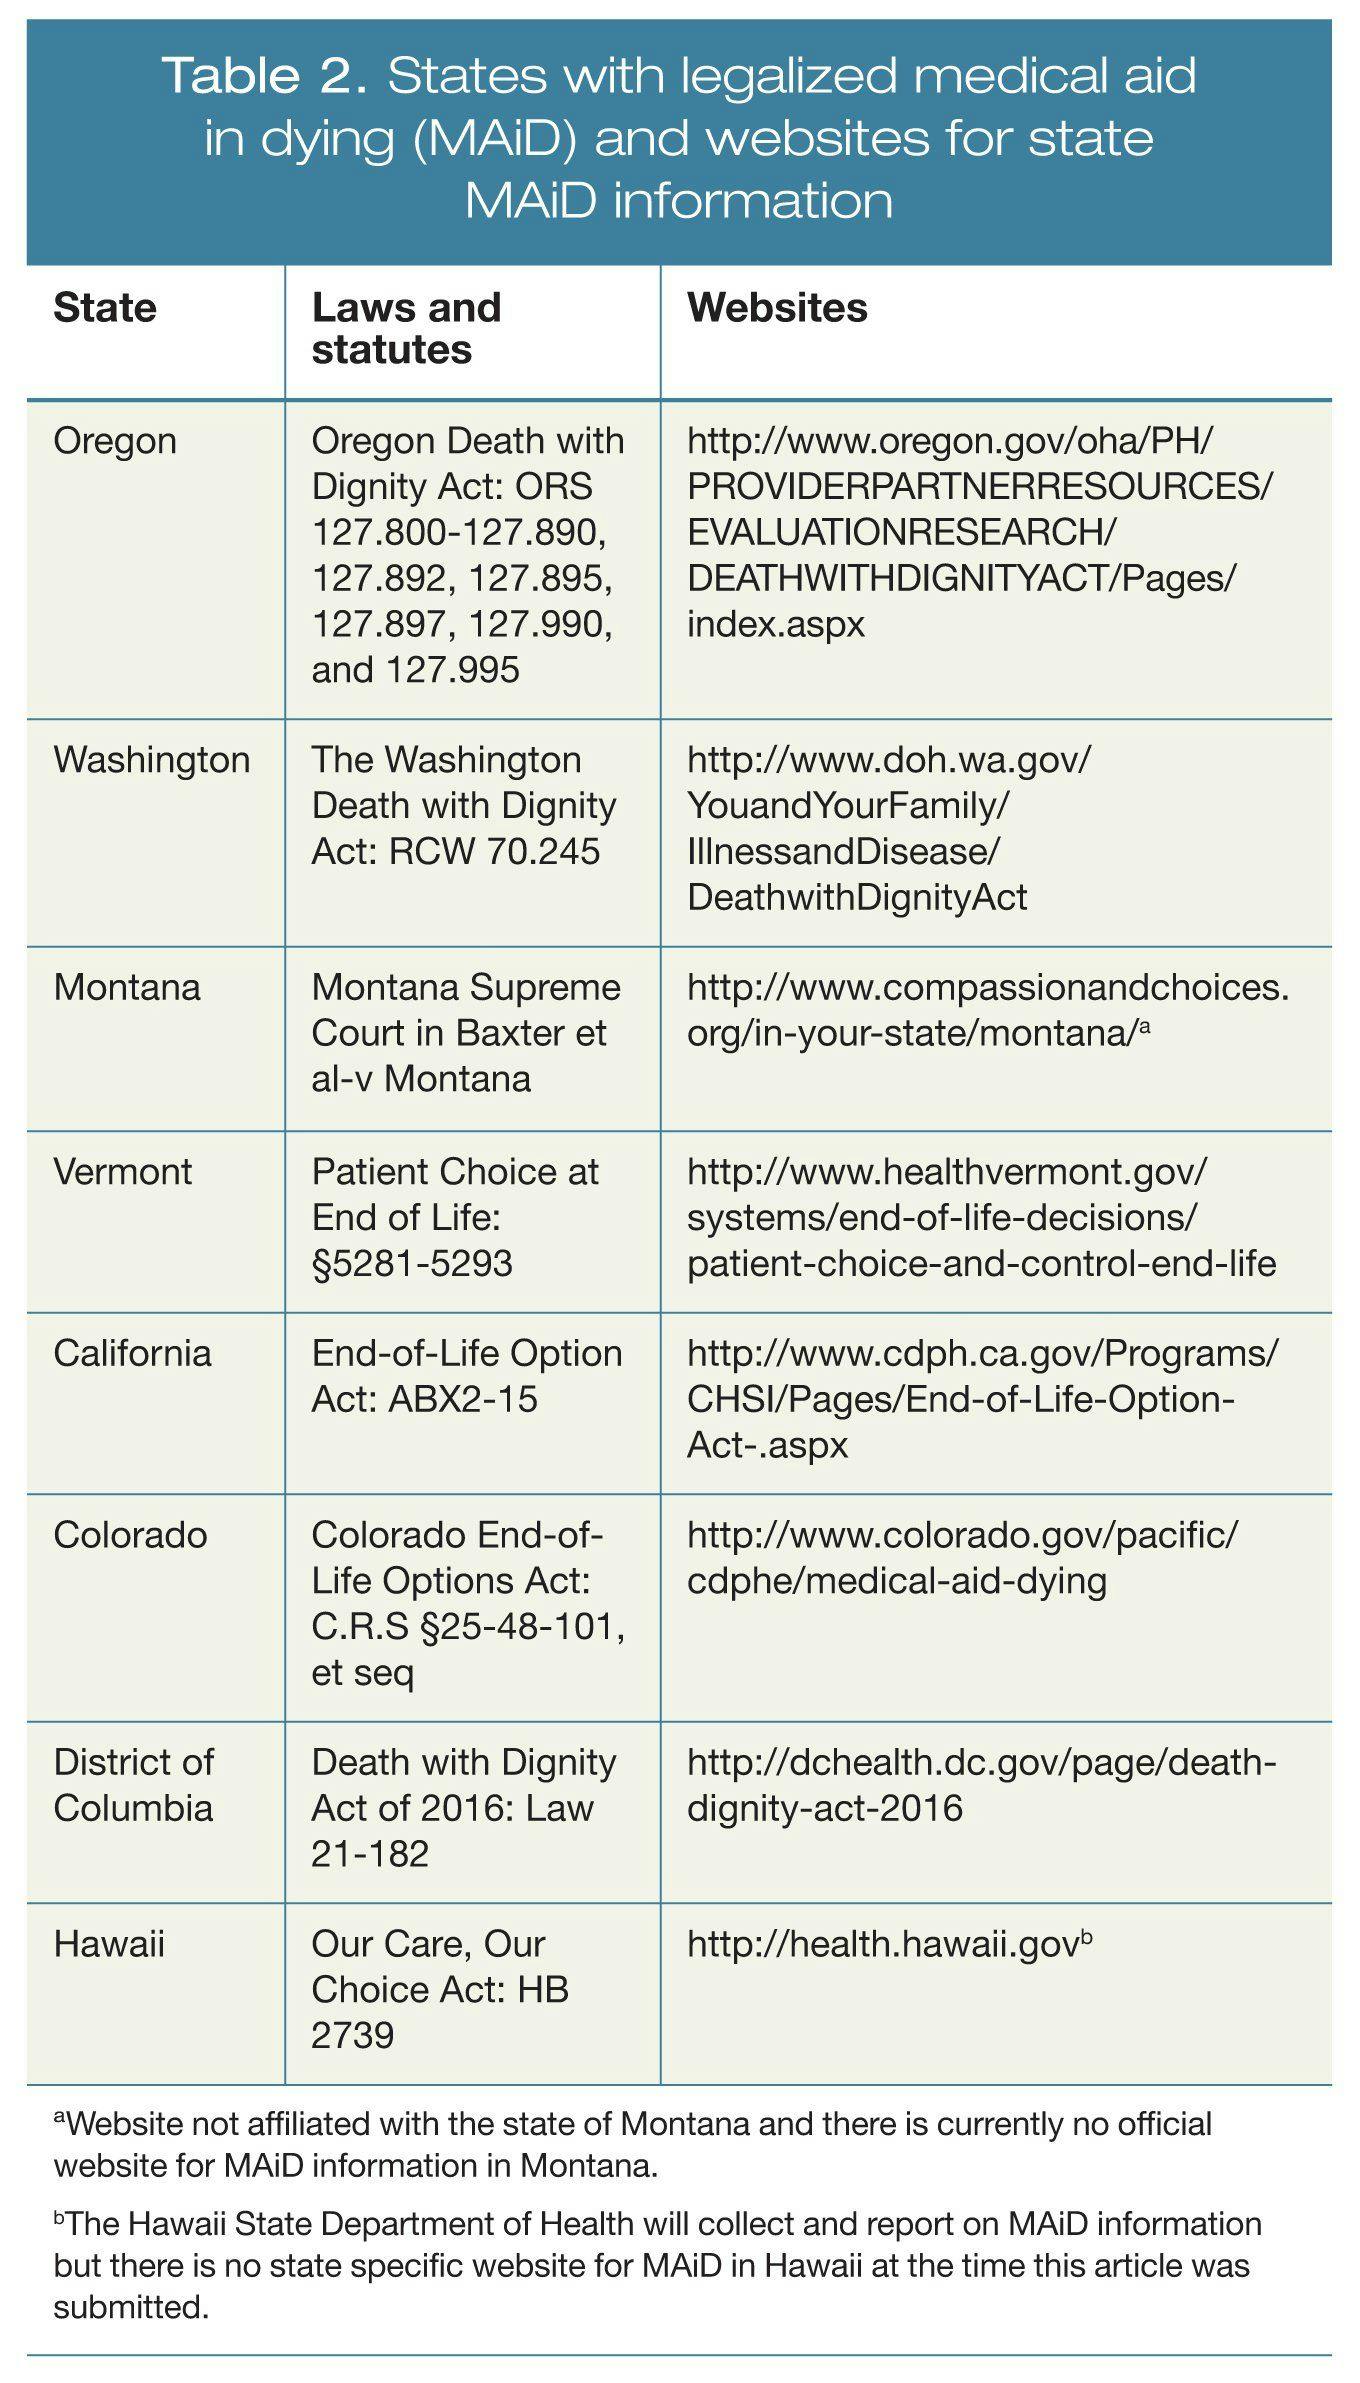 States with legalized medical aid in dying (MAiD) & websites for state MAiD info